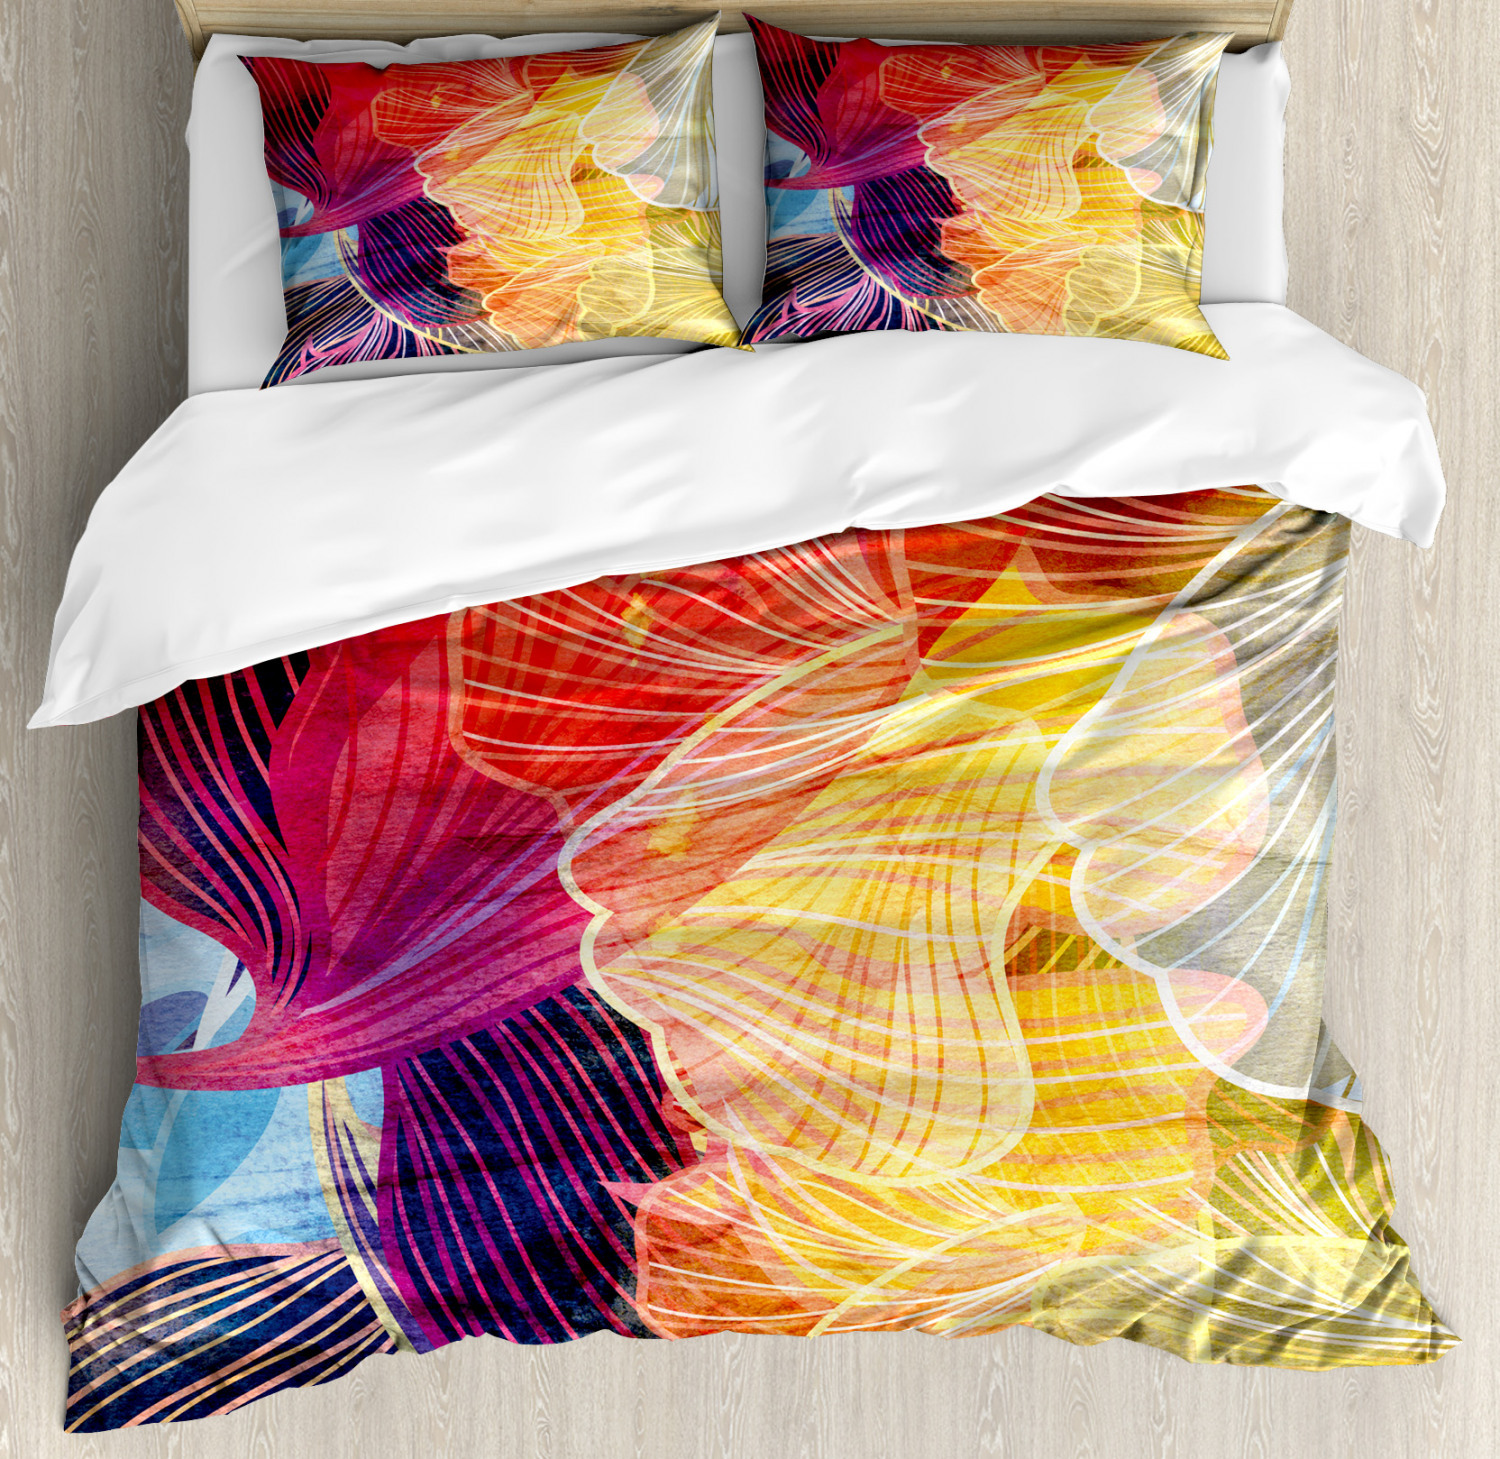 Retro Duvet Cover Set with Pillow Shams Abstract Colorful Natural Print ...